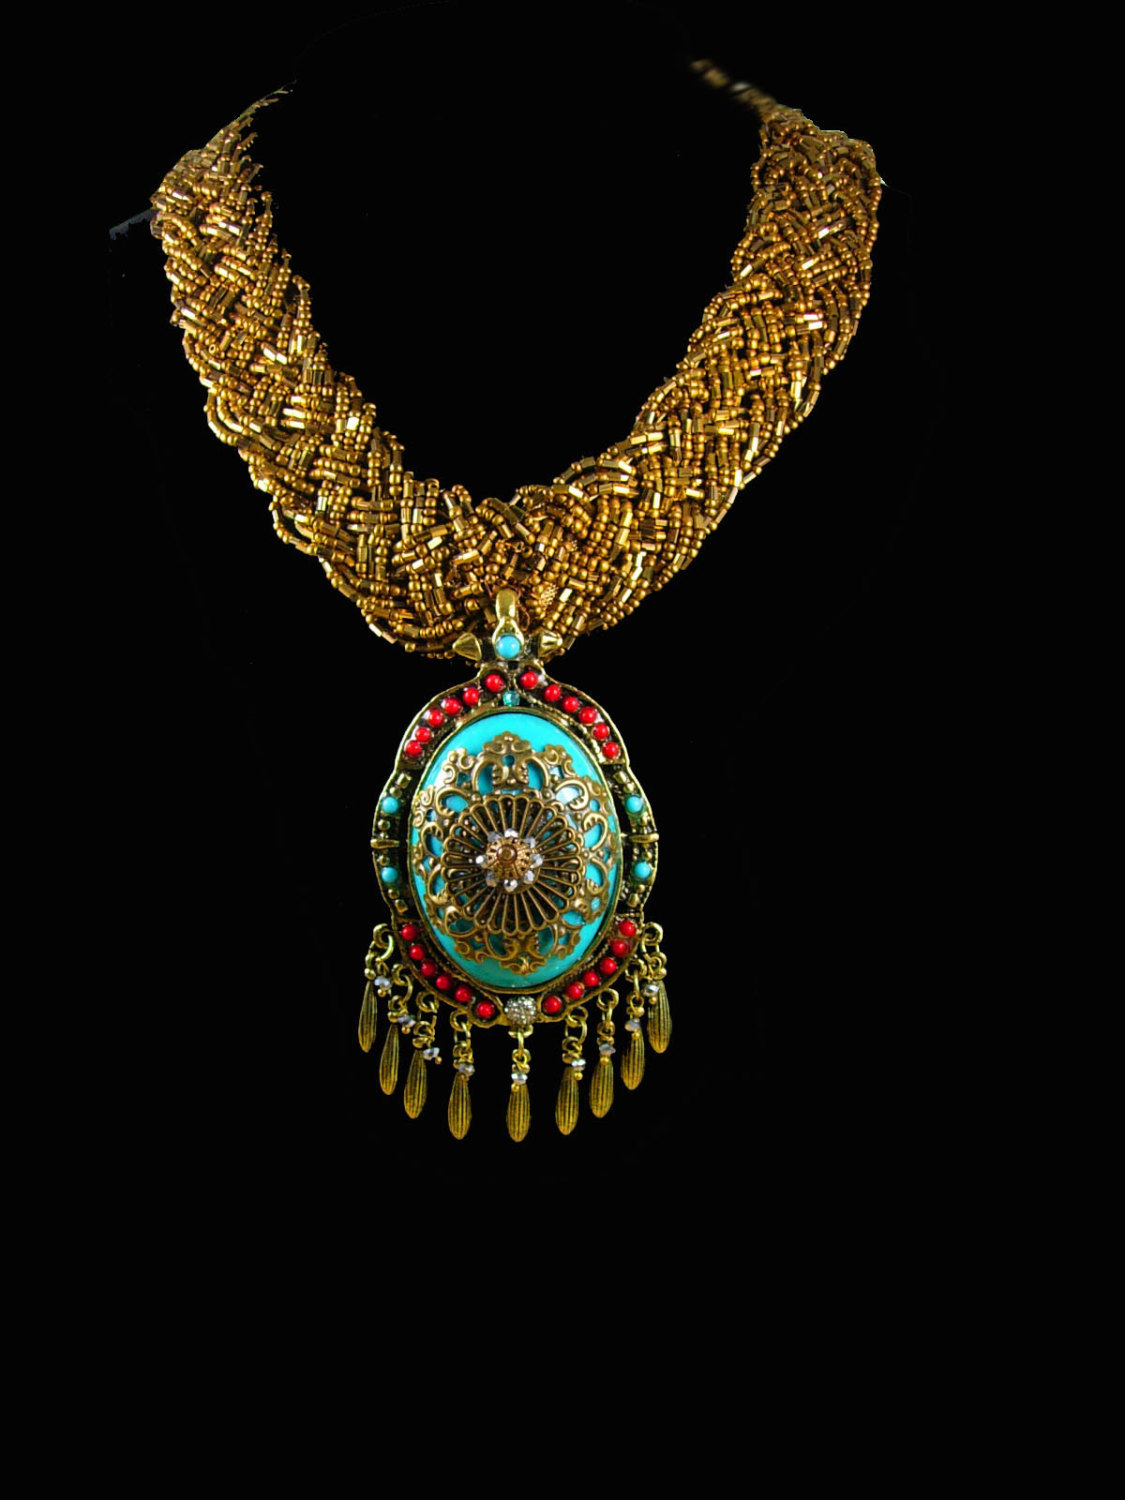 Primary image for Bohemian Queen Statement collar necklace HUGE Persian turquoise chandelier with 